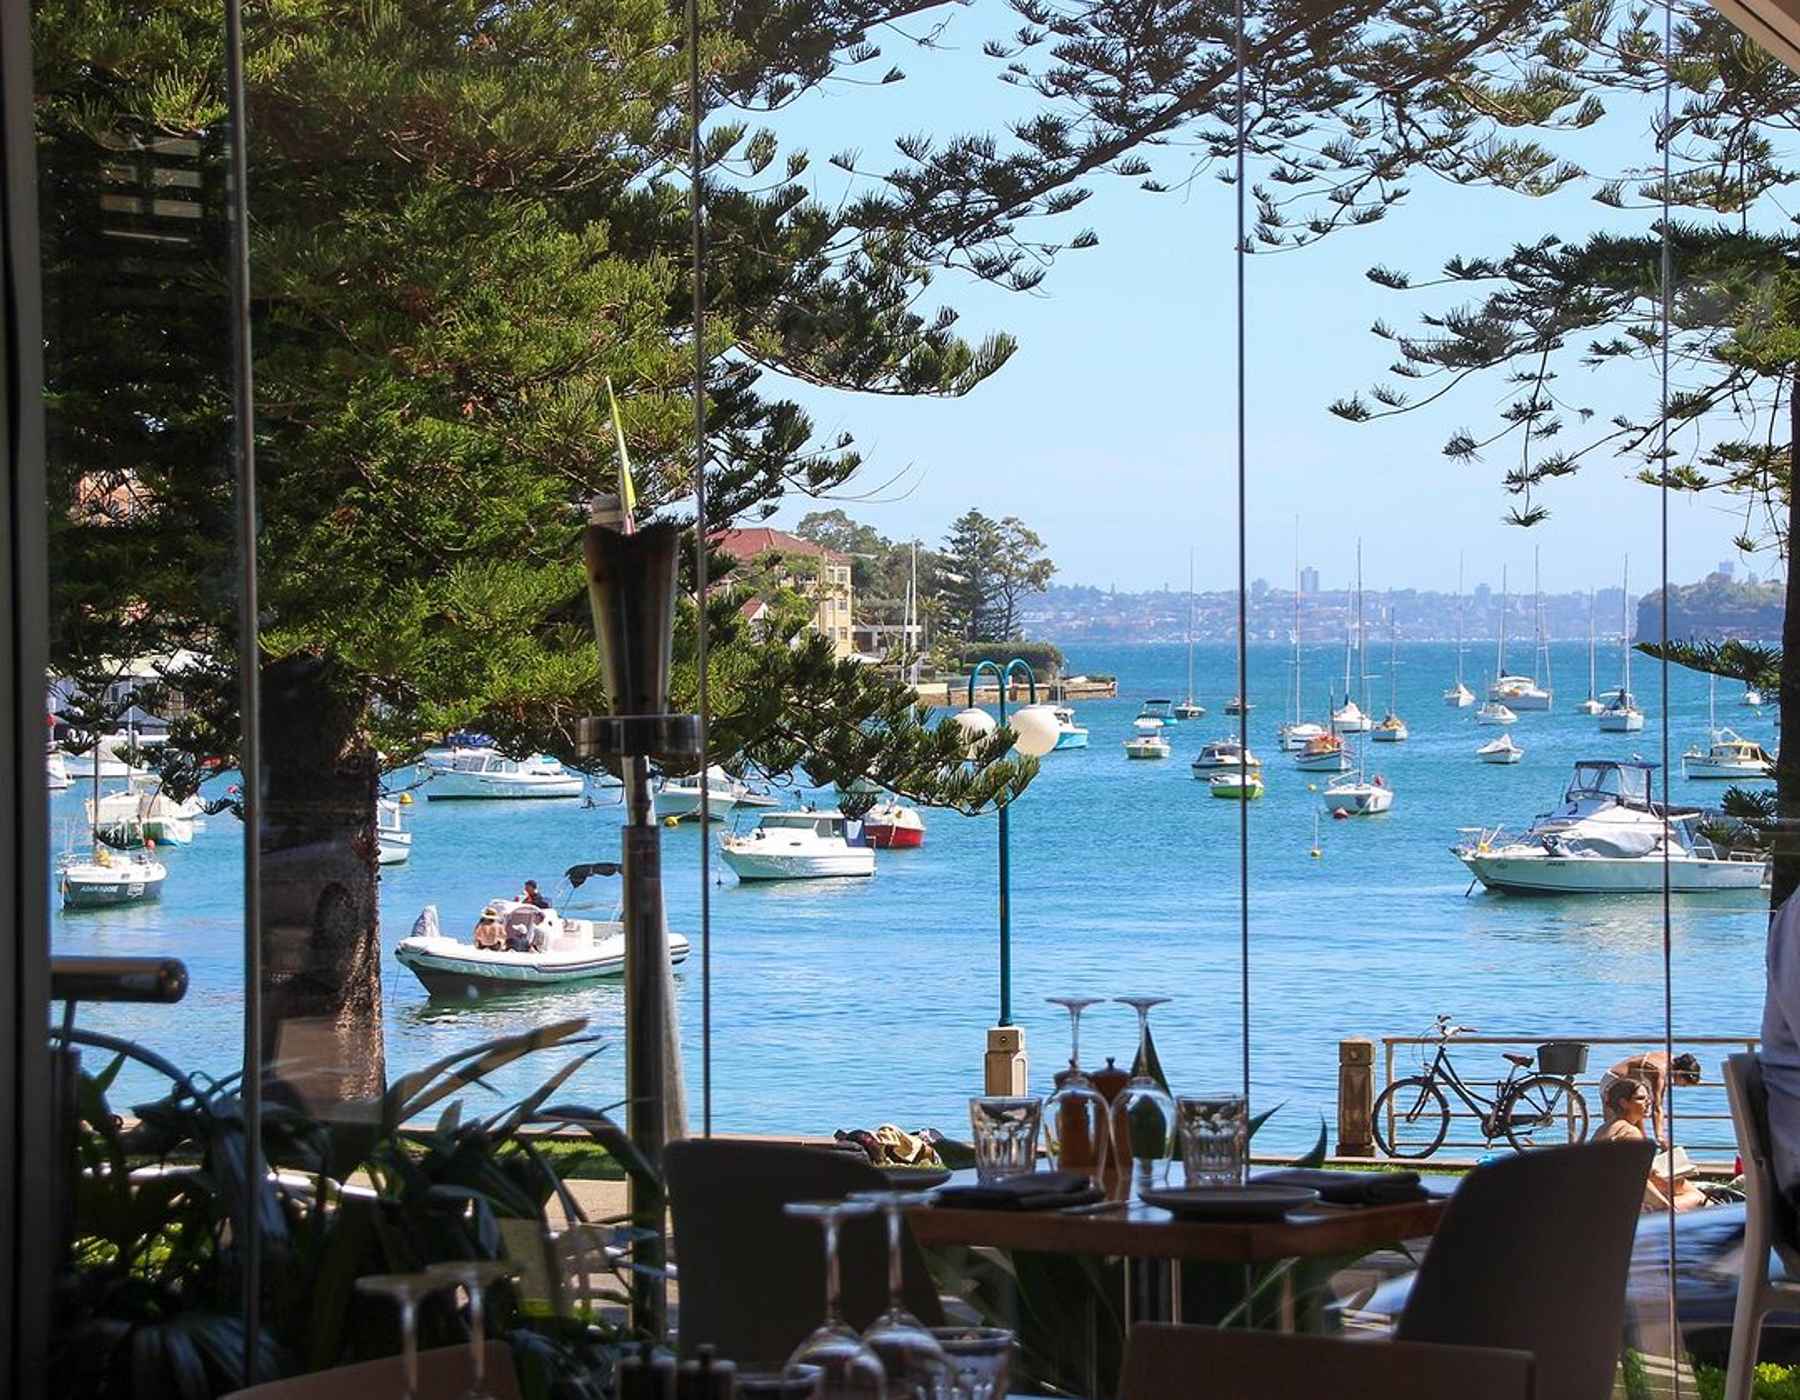 Sydney: Here's how to dine waterfront for half the price